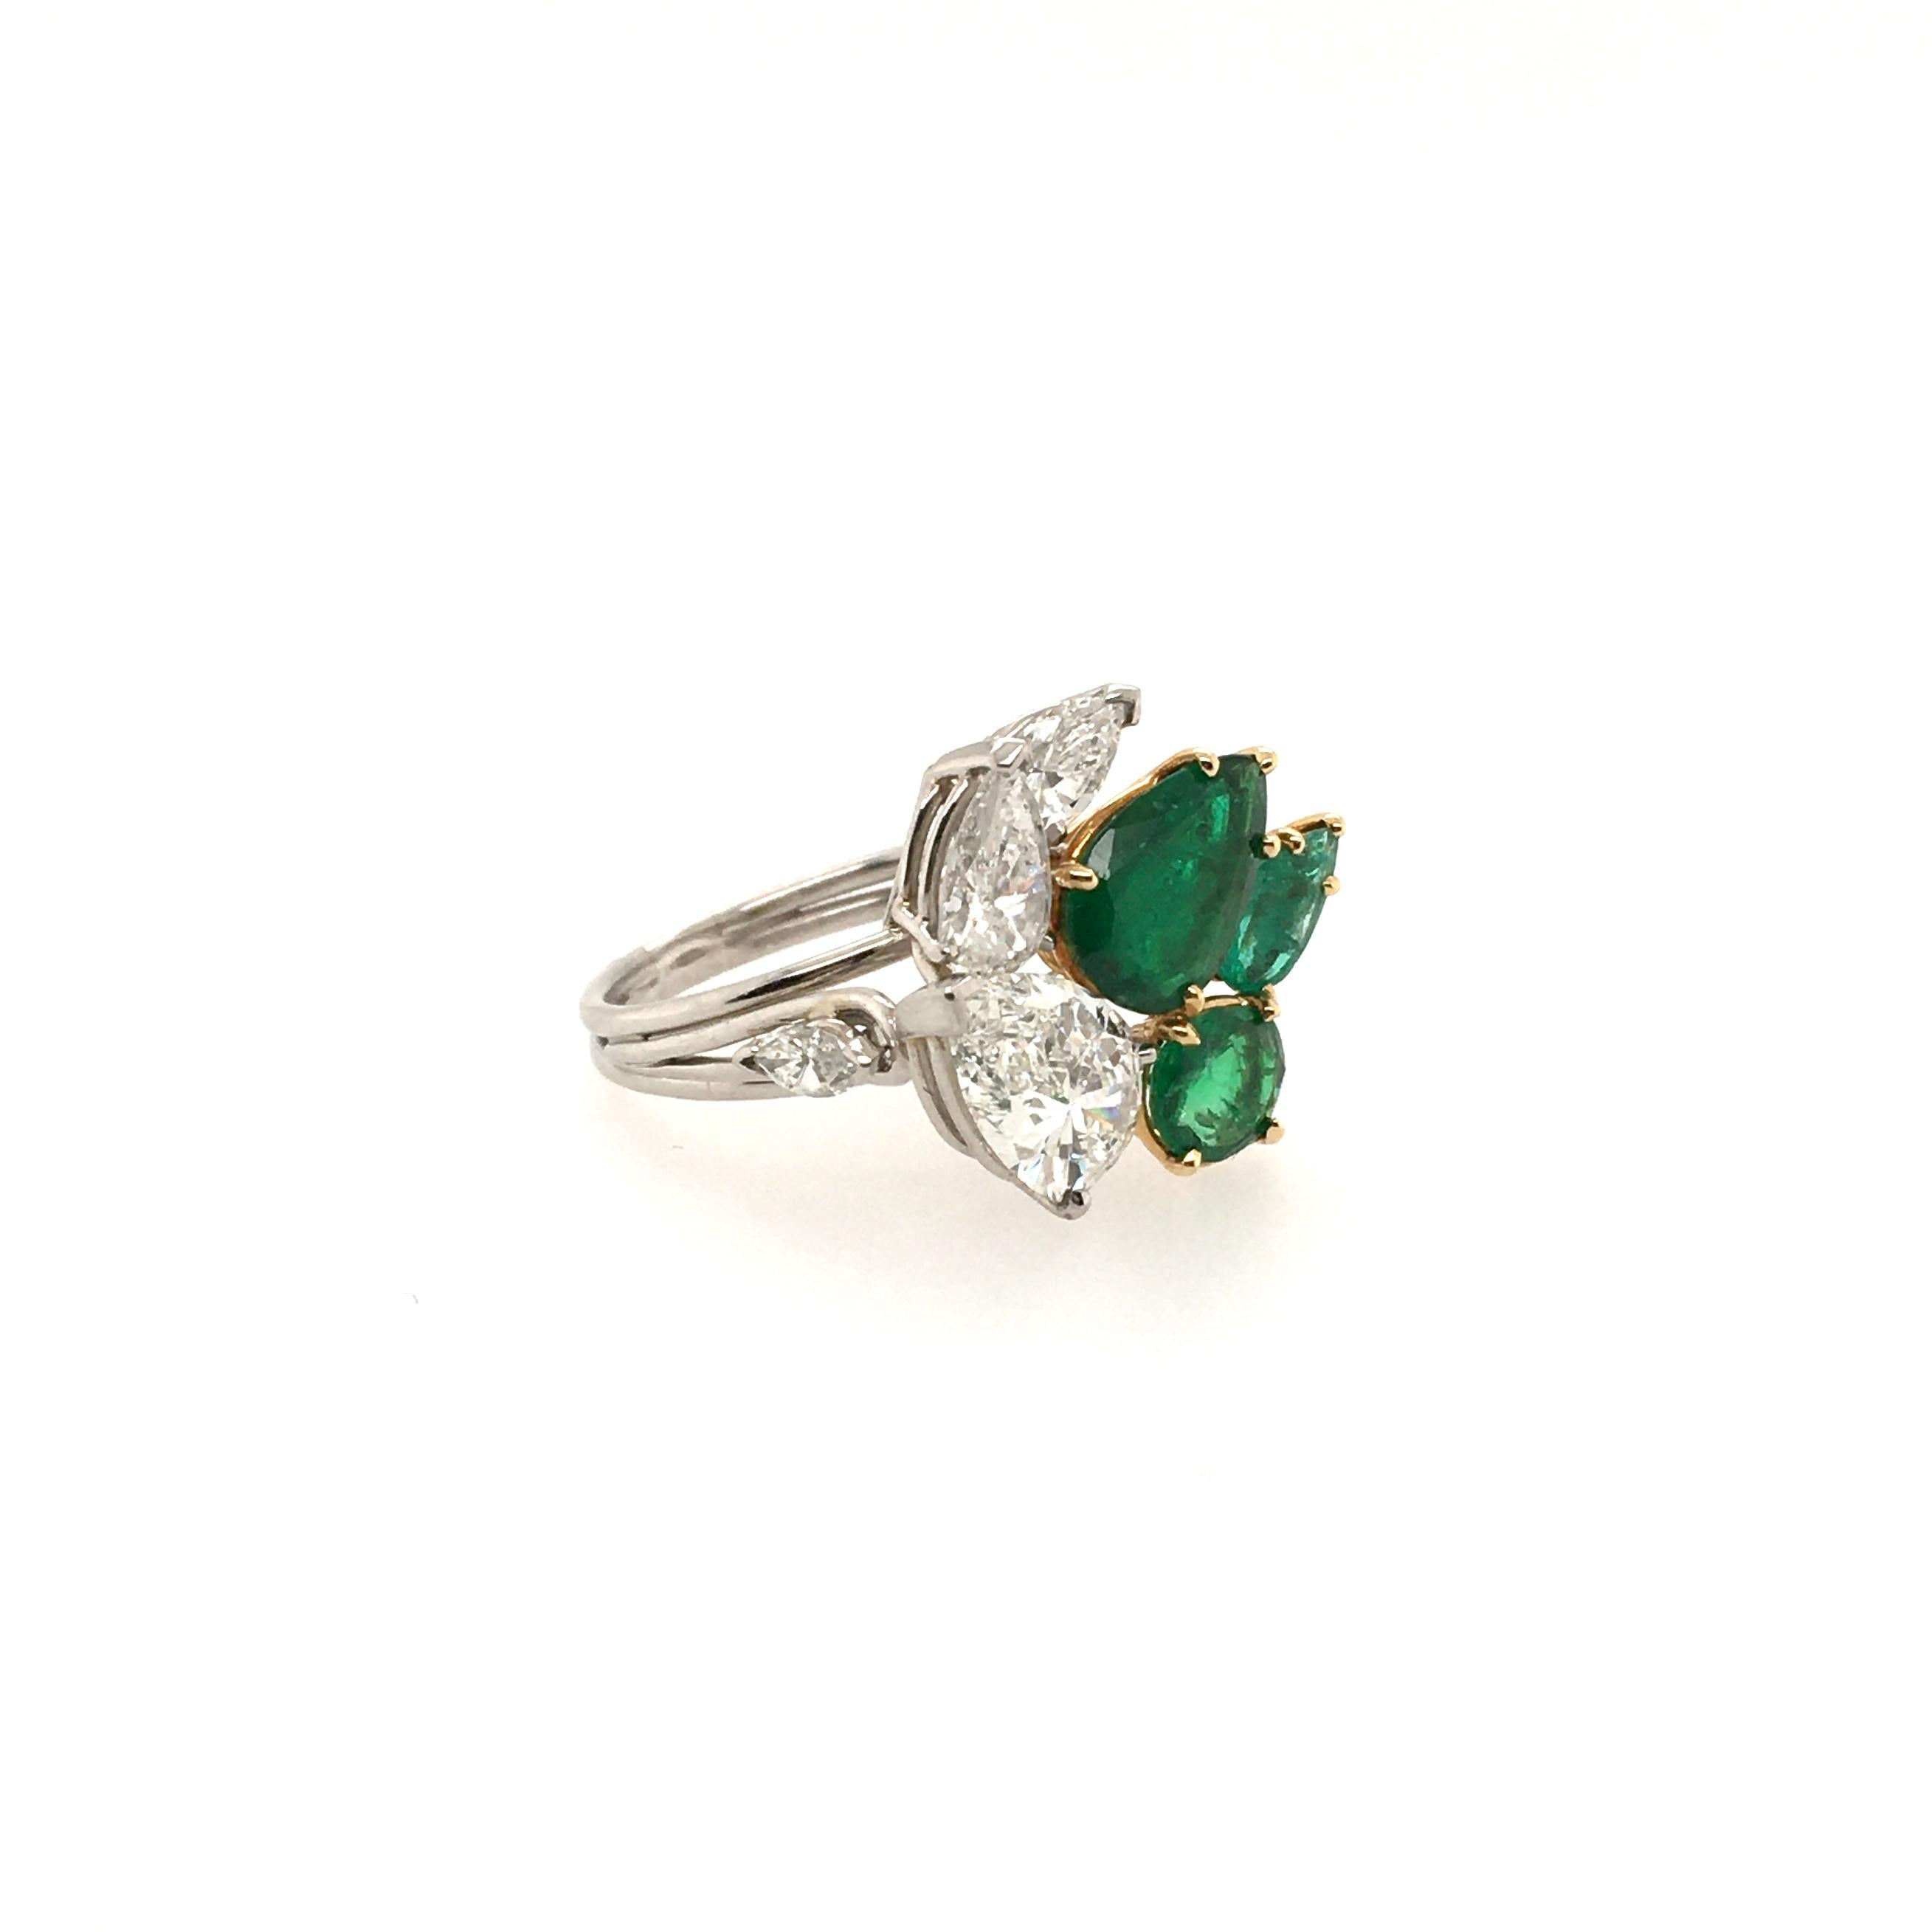 A platinum, emerald and diamond ring. Circa 1950. Designed as a cluster of pear and oval cut diamonds and emeralds. Three (3) pear shaped diamonds, two (2) pear shaped and one (1) oval cut diamond. The largest diamond weighs 1.60 carats, remaining